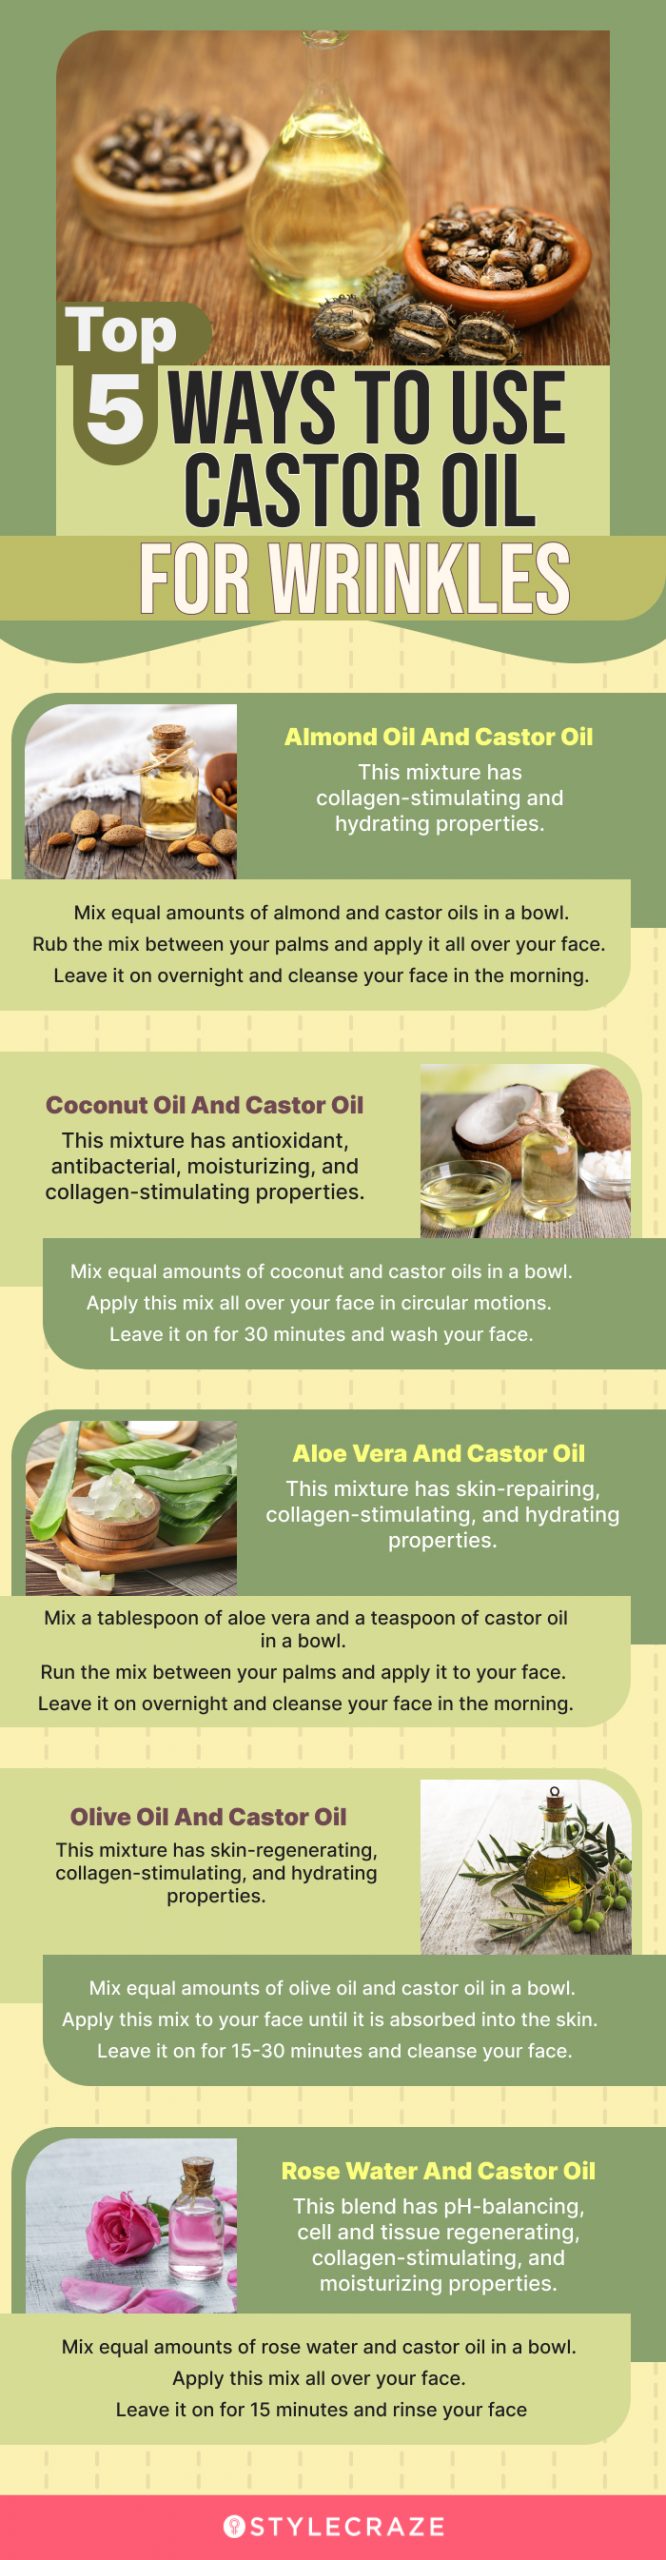 top 5 ways to use castor oil for wrinkles (infographic)